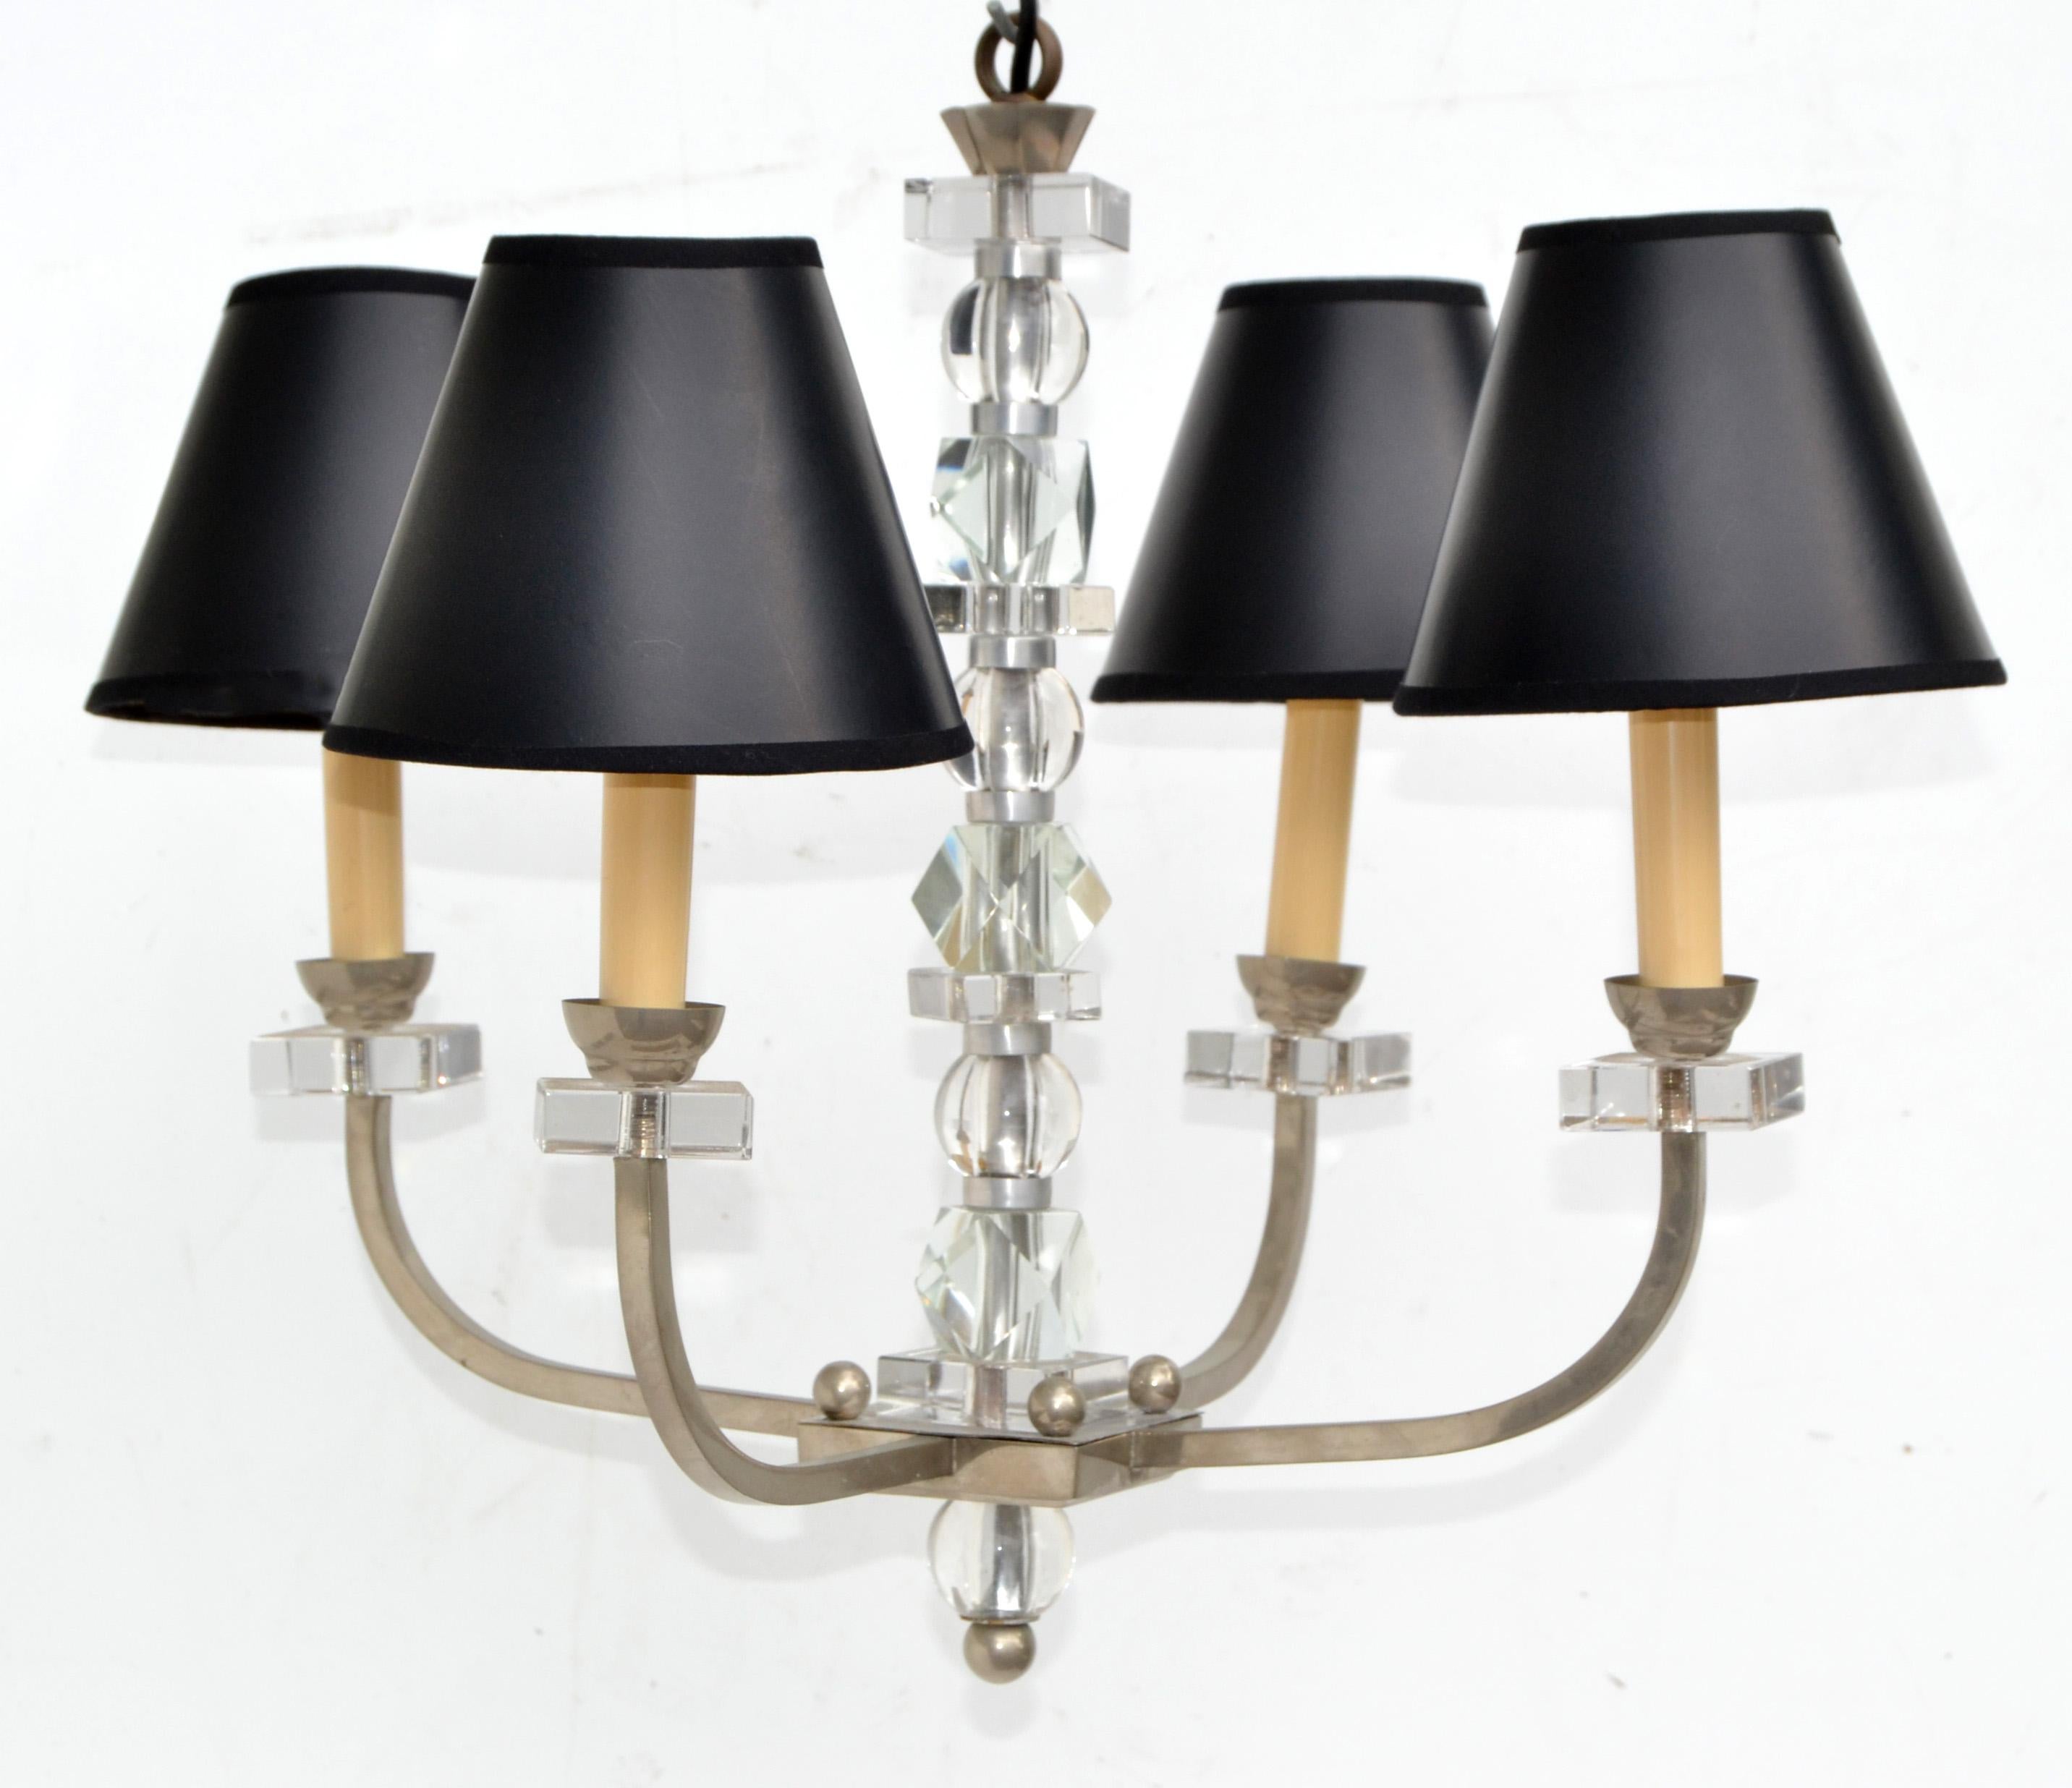 Four lights nickel-plated over brass chandelier in the style of Jacques Adnet.
Stem and sockets are decorated with geometric shaped faceted Glass pieces.
Come with the black & gold clip on paper shades.
US rewired and in working condition, takes